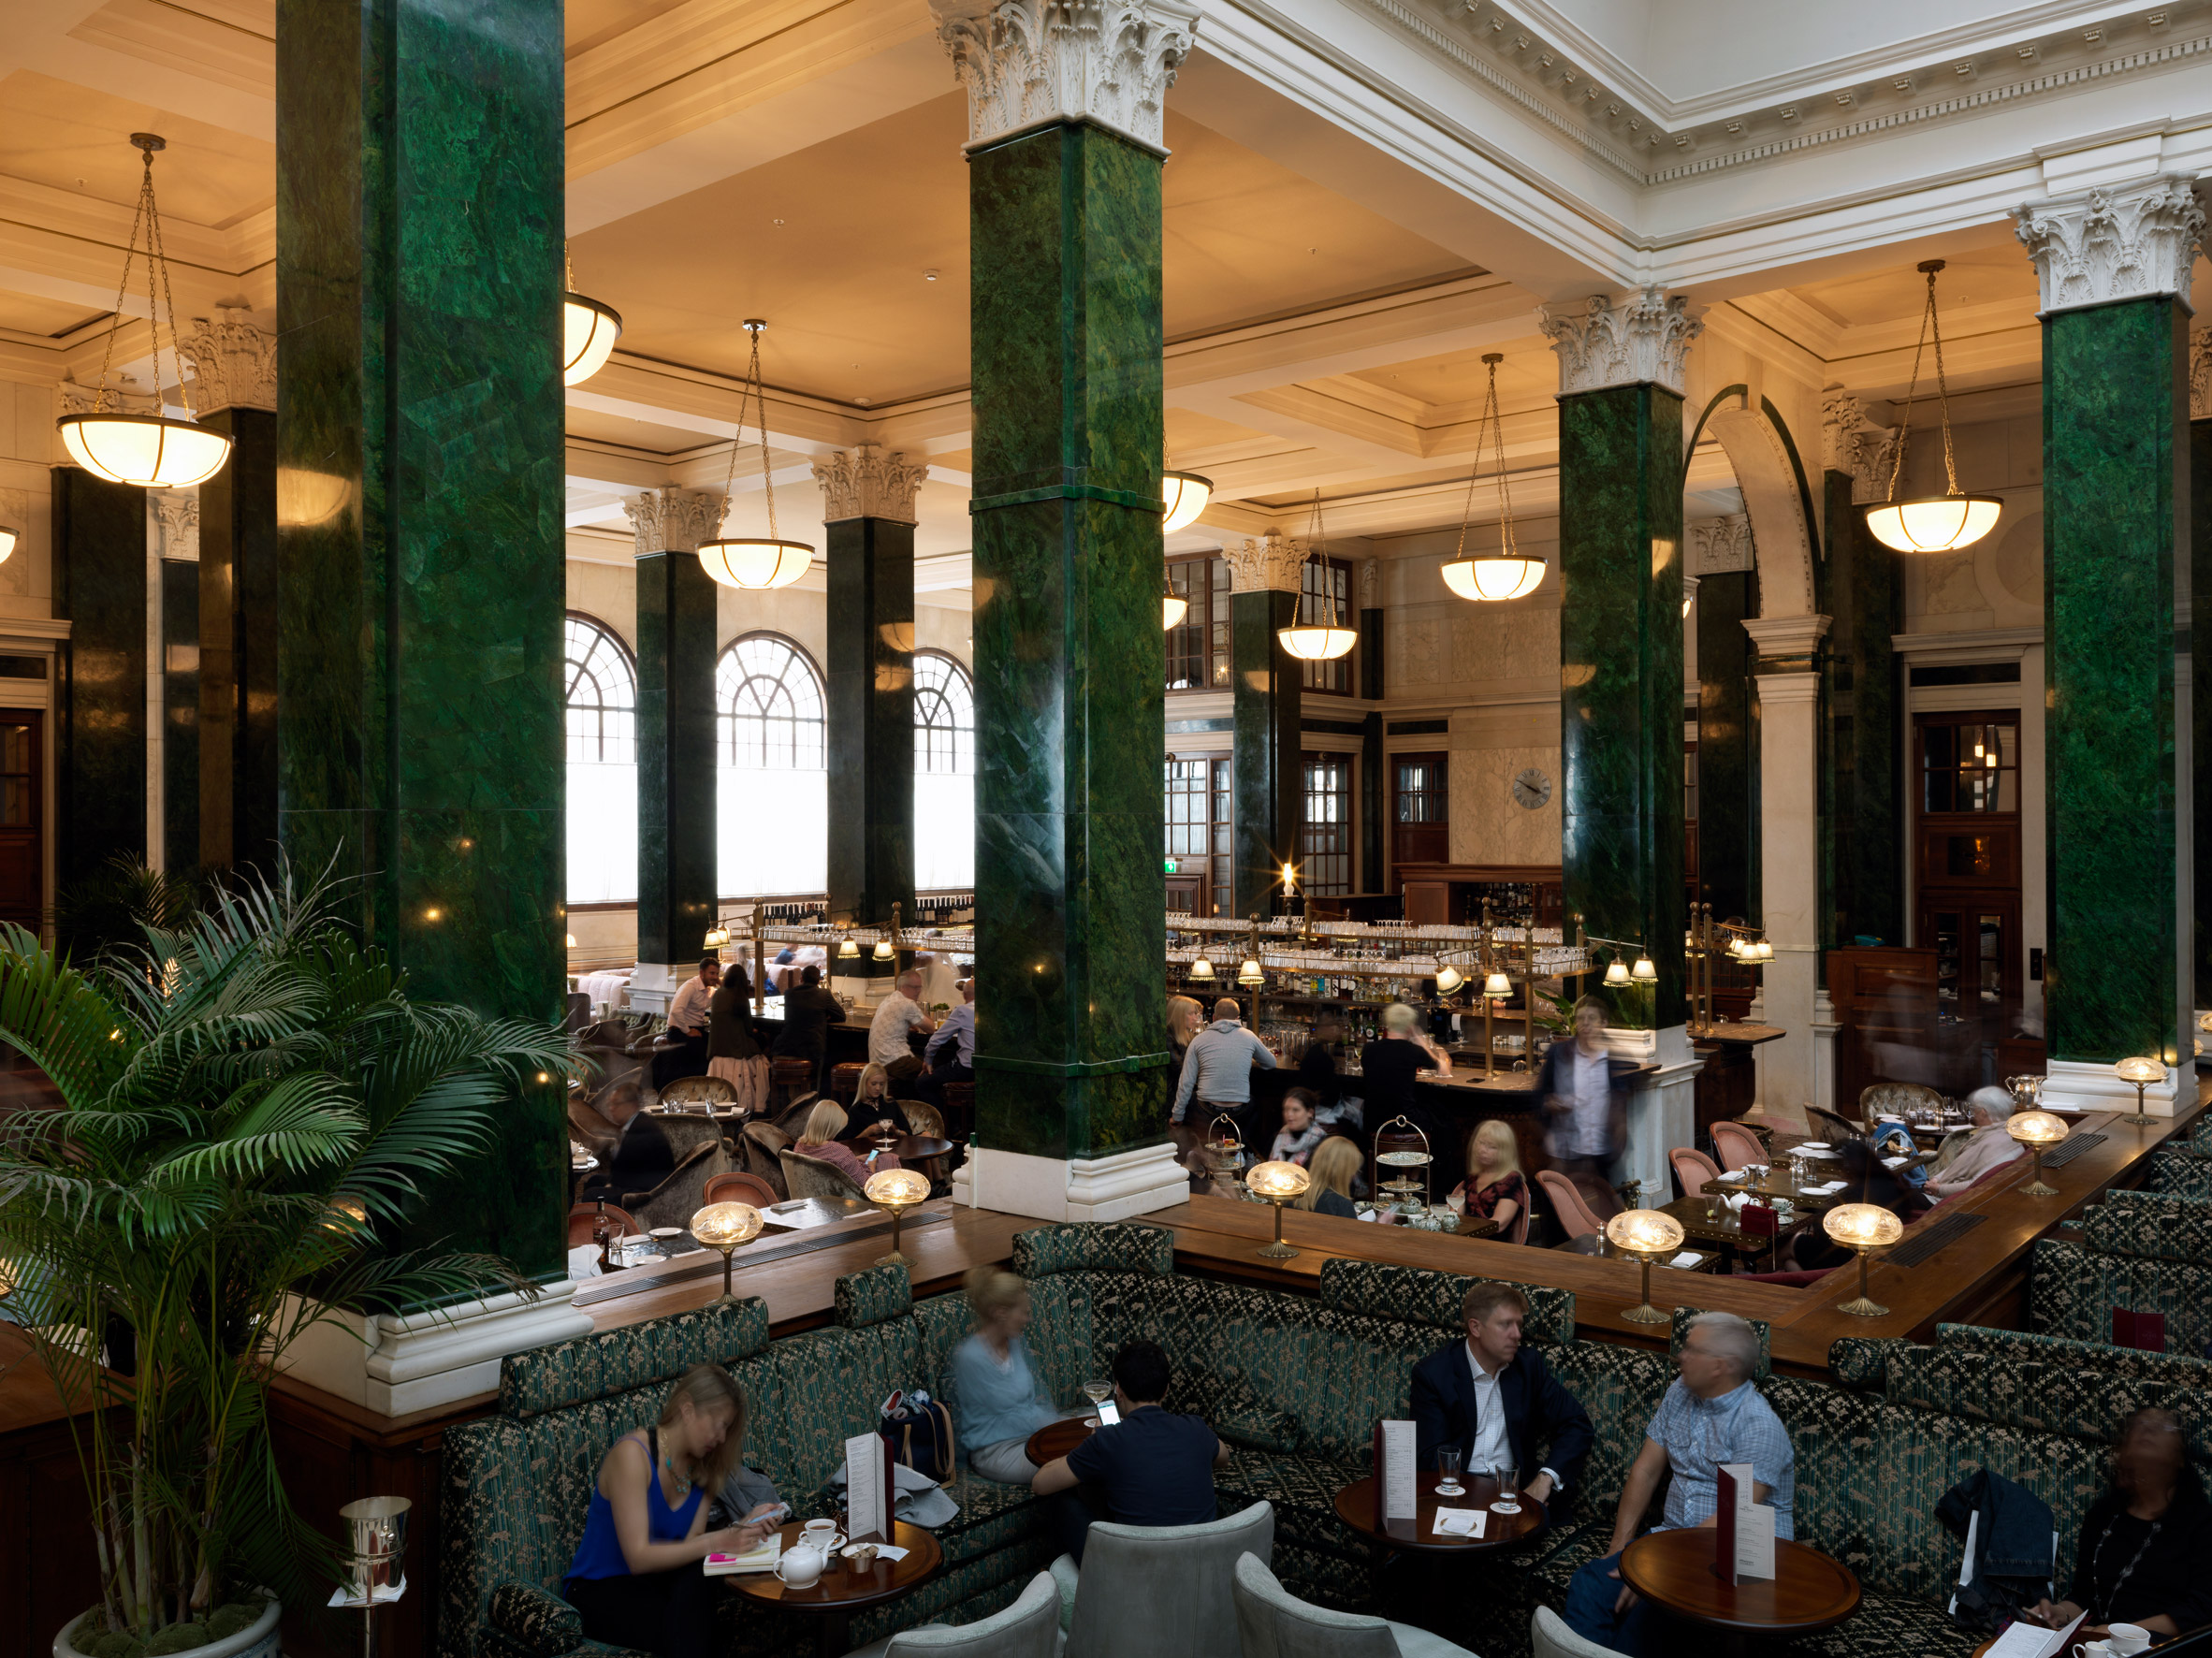 The Ned, Soho House's grand hotel in the City of London